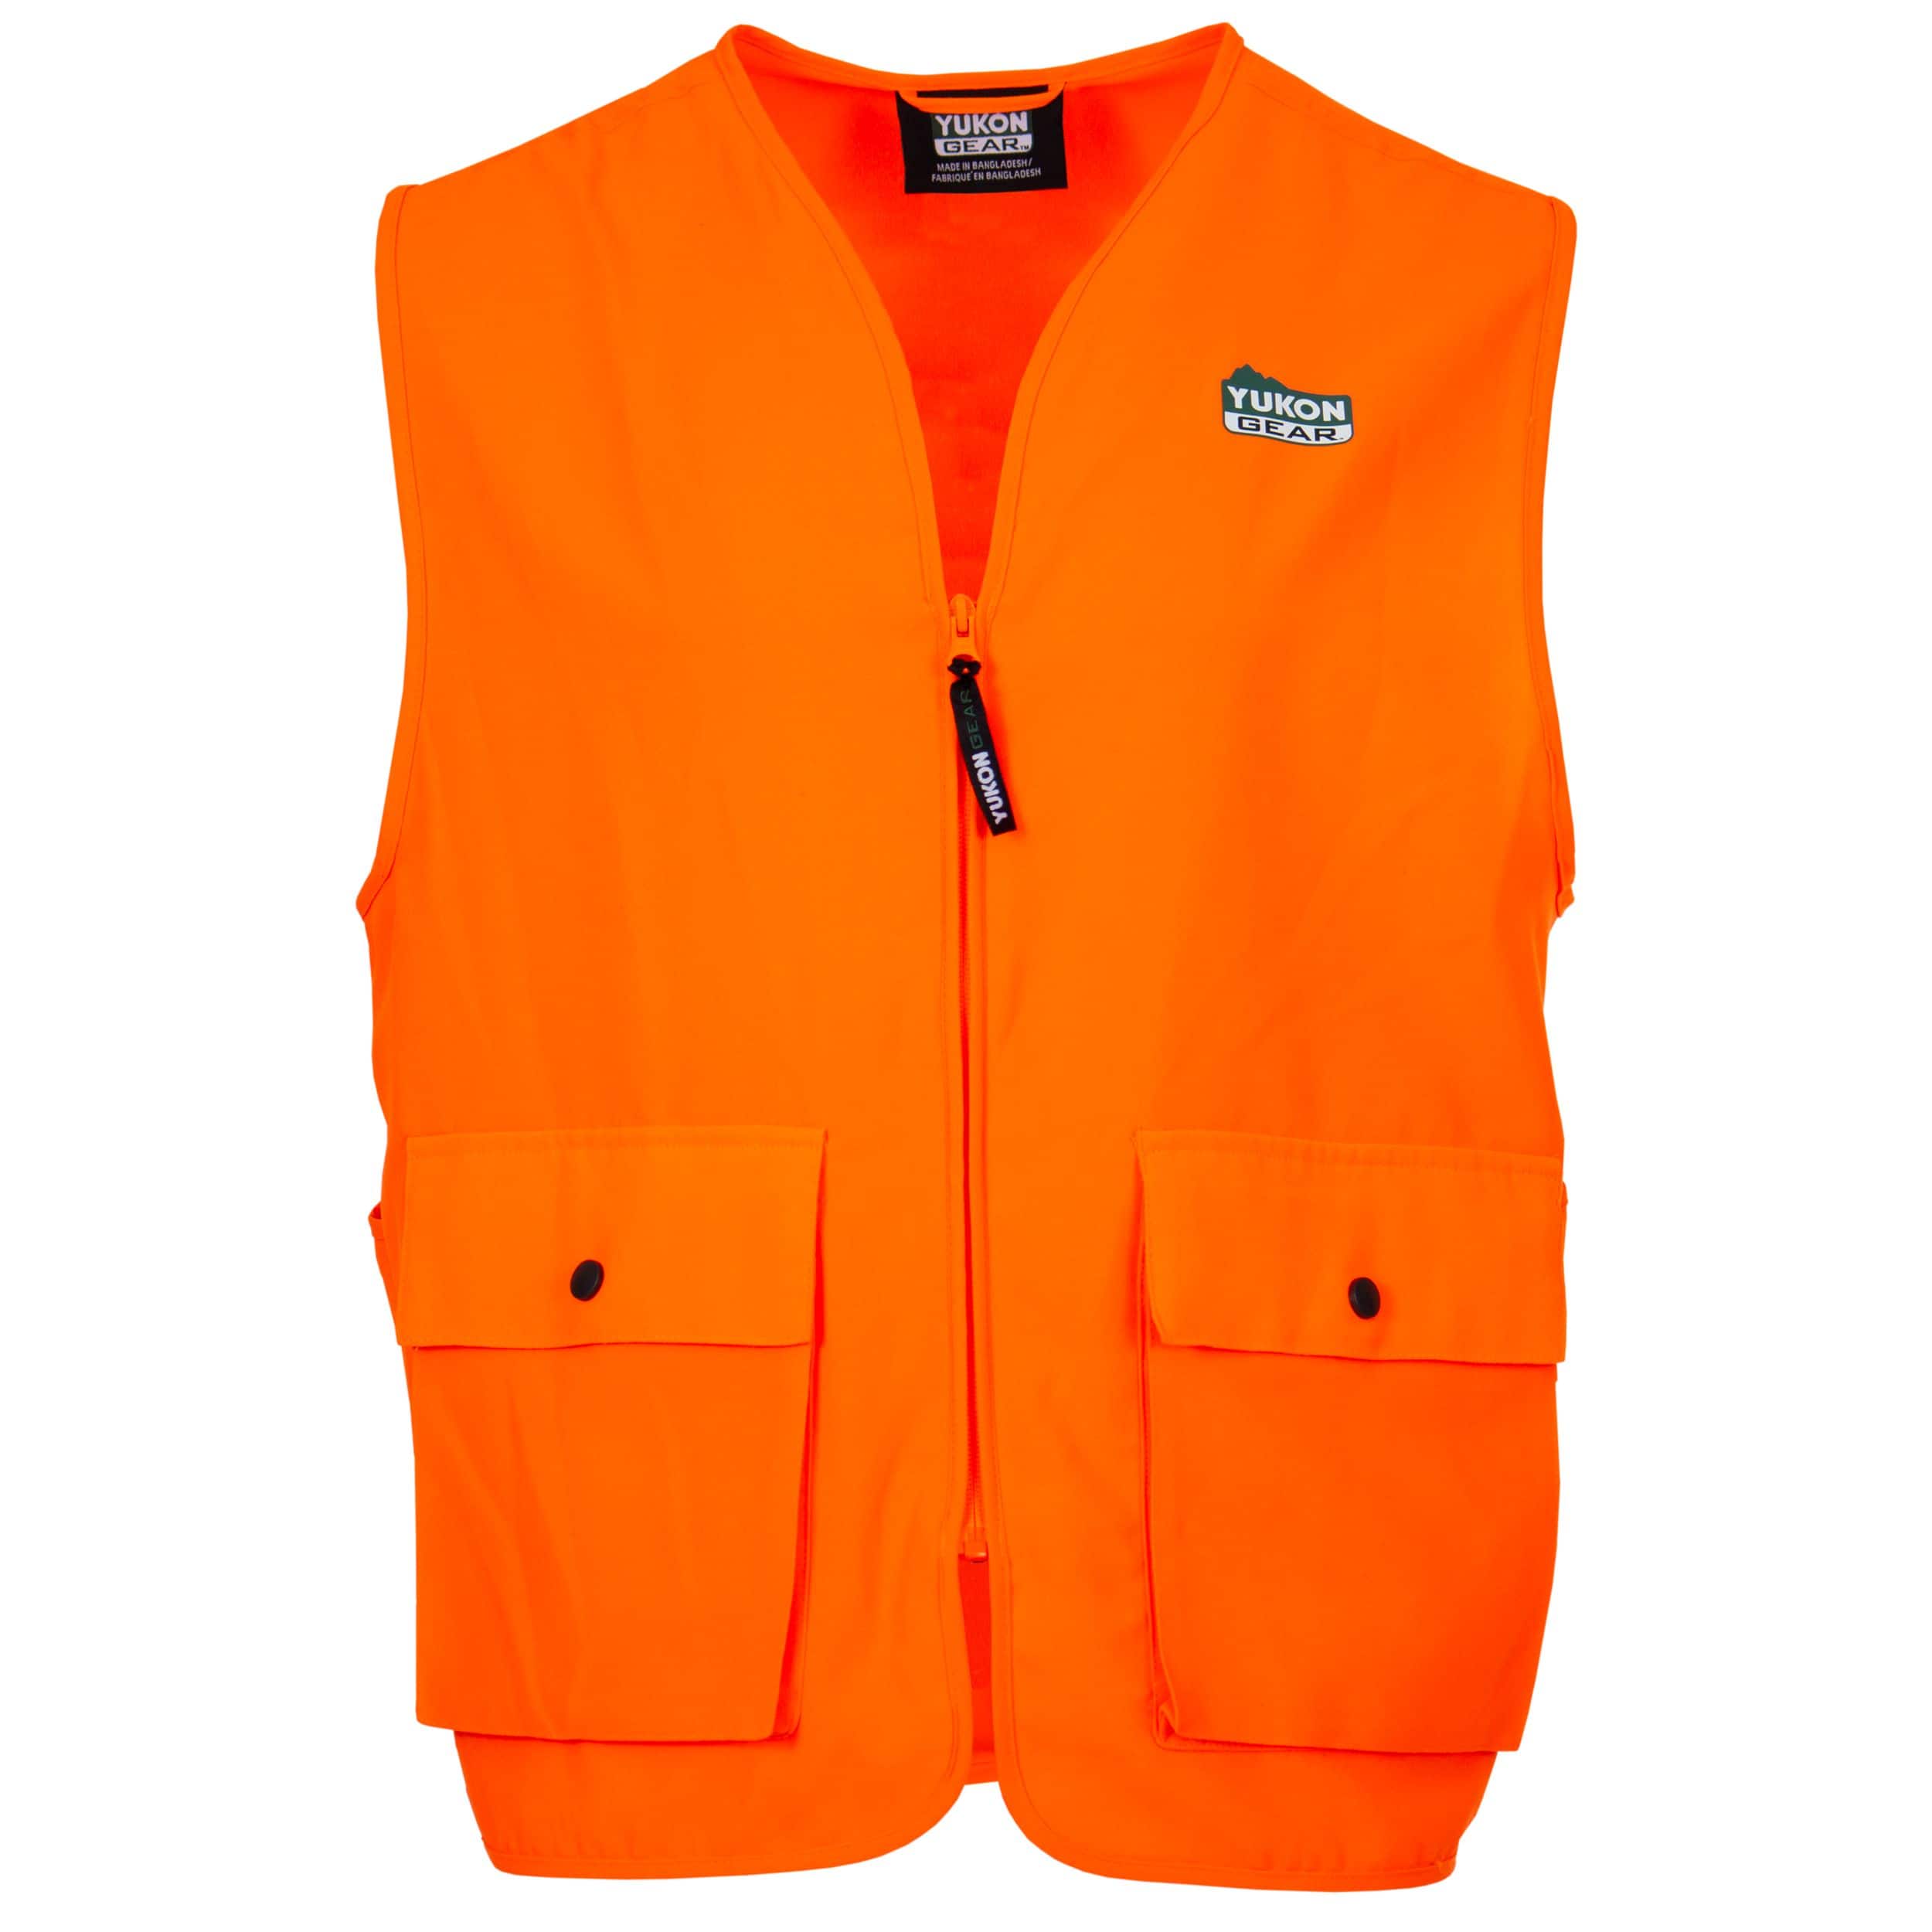 https://media-www.canadiantire.ca/product/playing/hunting/hunting-apparel-footwear/0753614/yukon-gear-deluxe-vest-large-f8a2d125-e354-4bed-84d2-6febc8451abc-jpgrendition.jpg